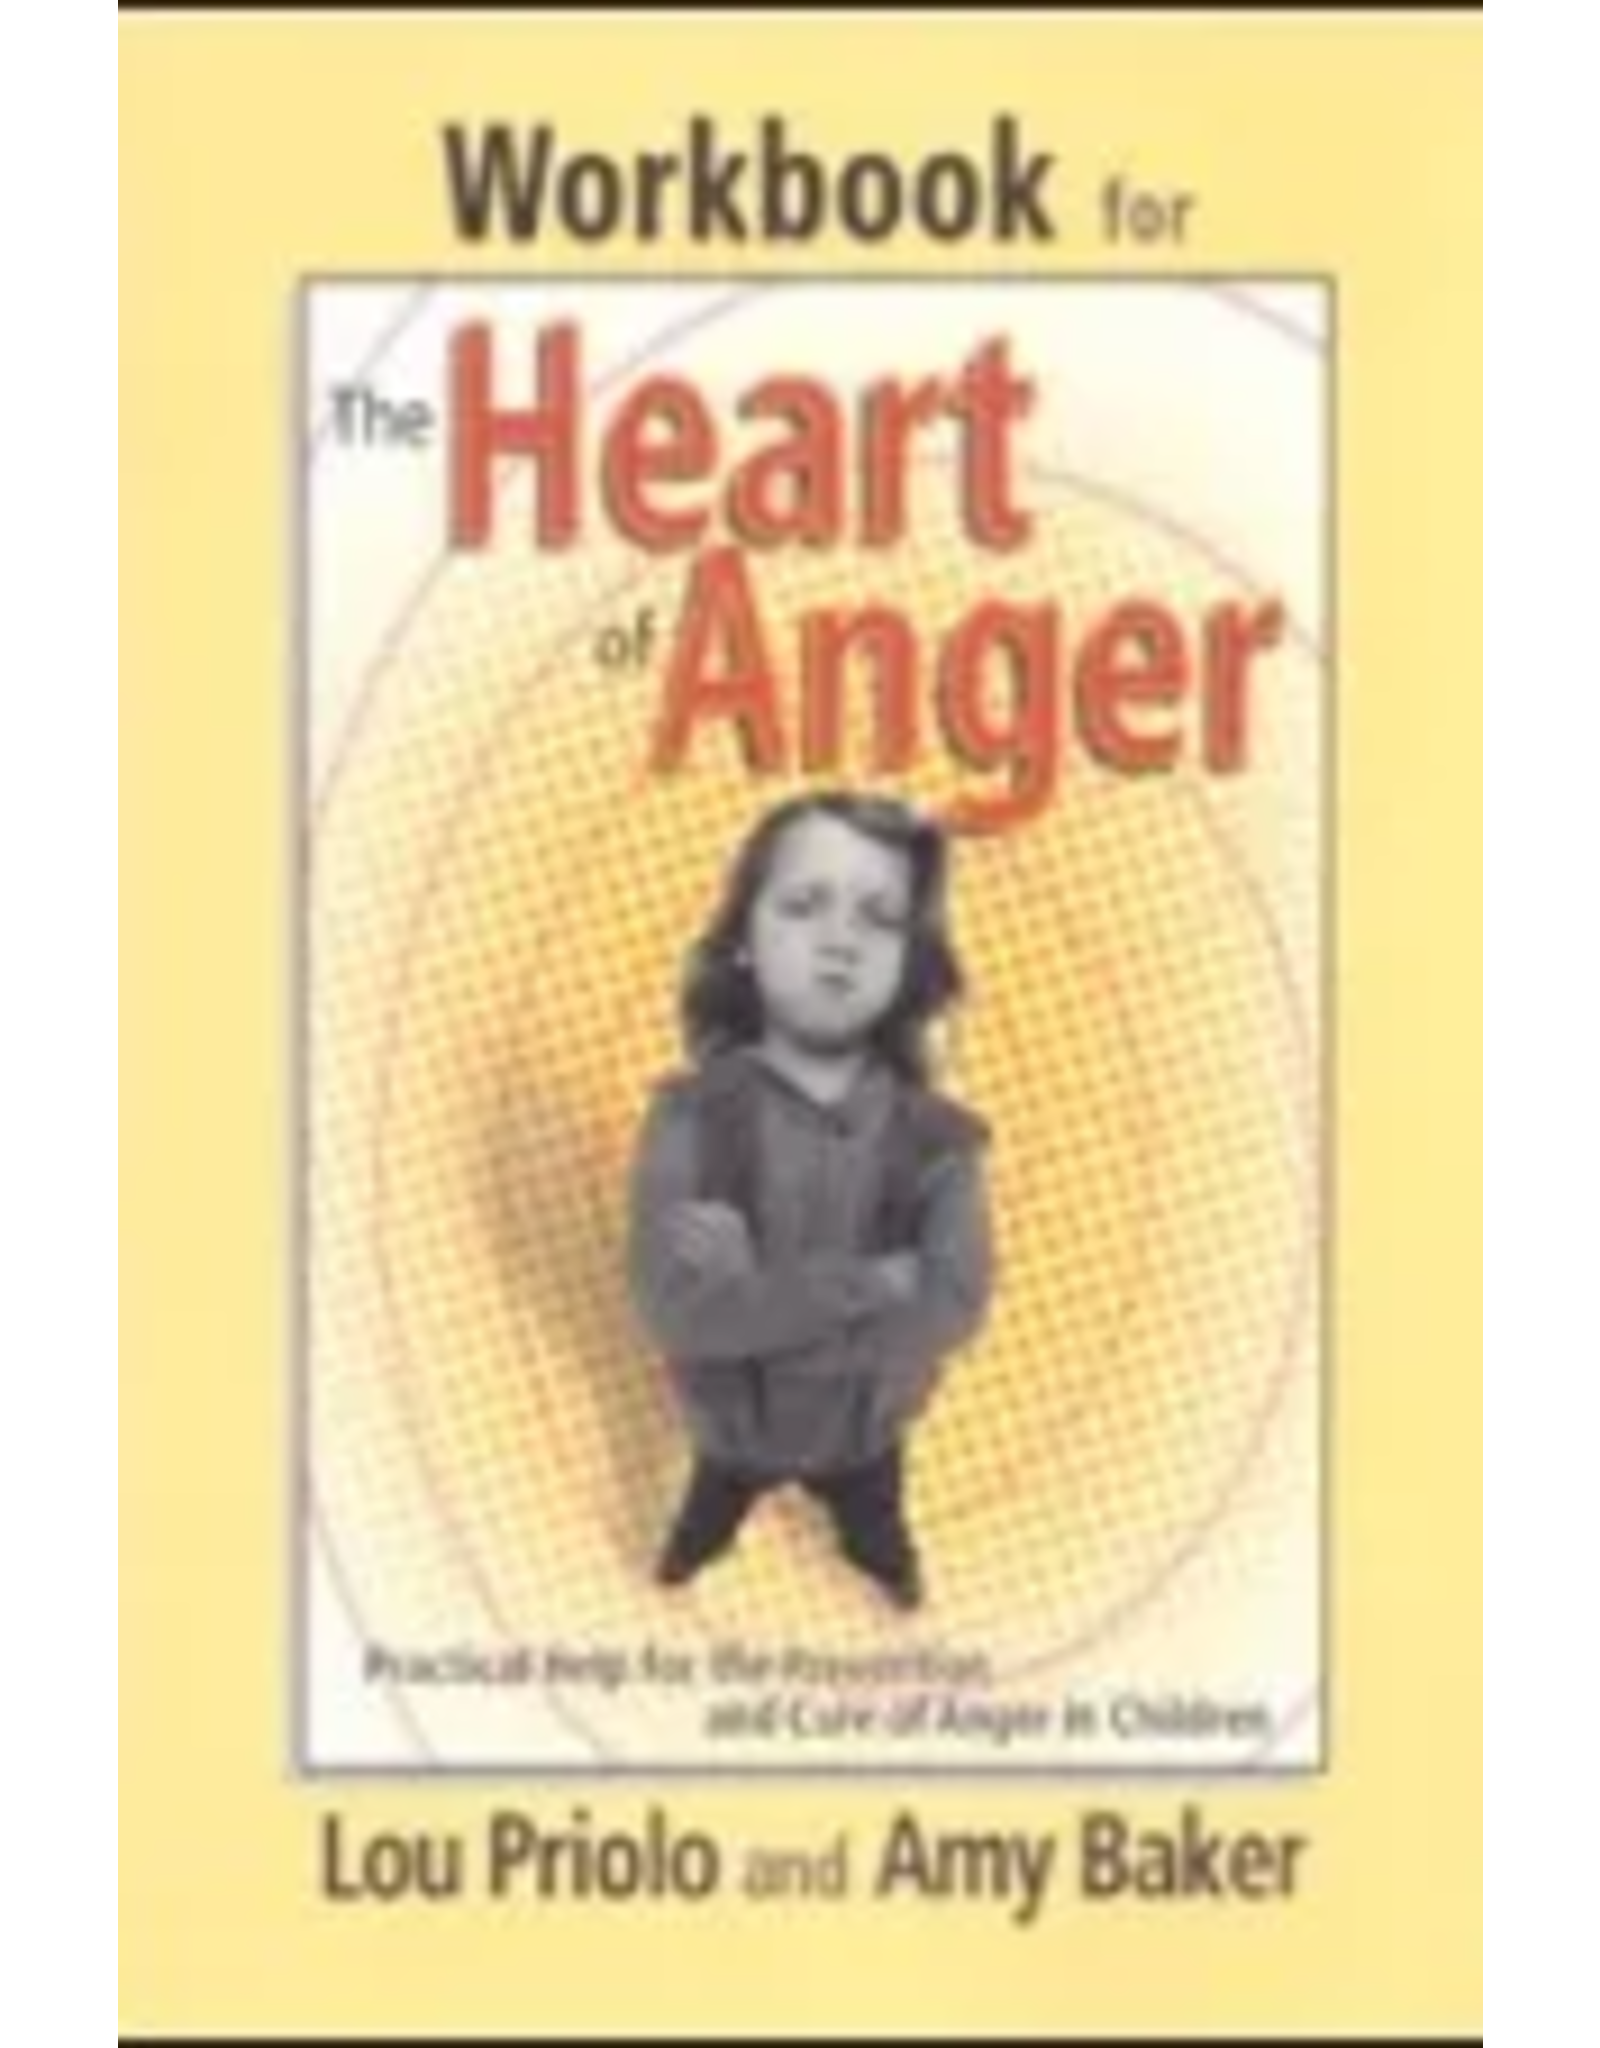 Lou Priolo Heart of Anger Workbook